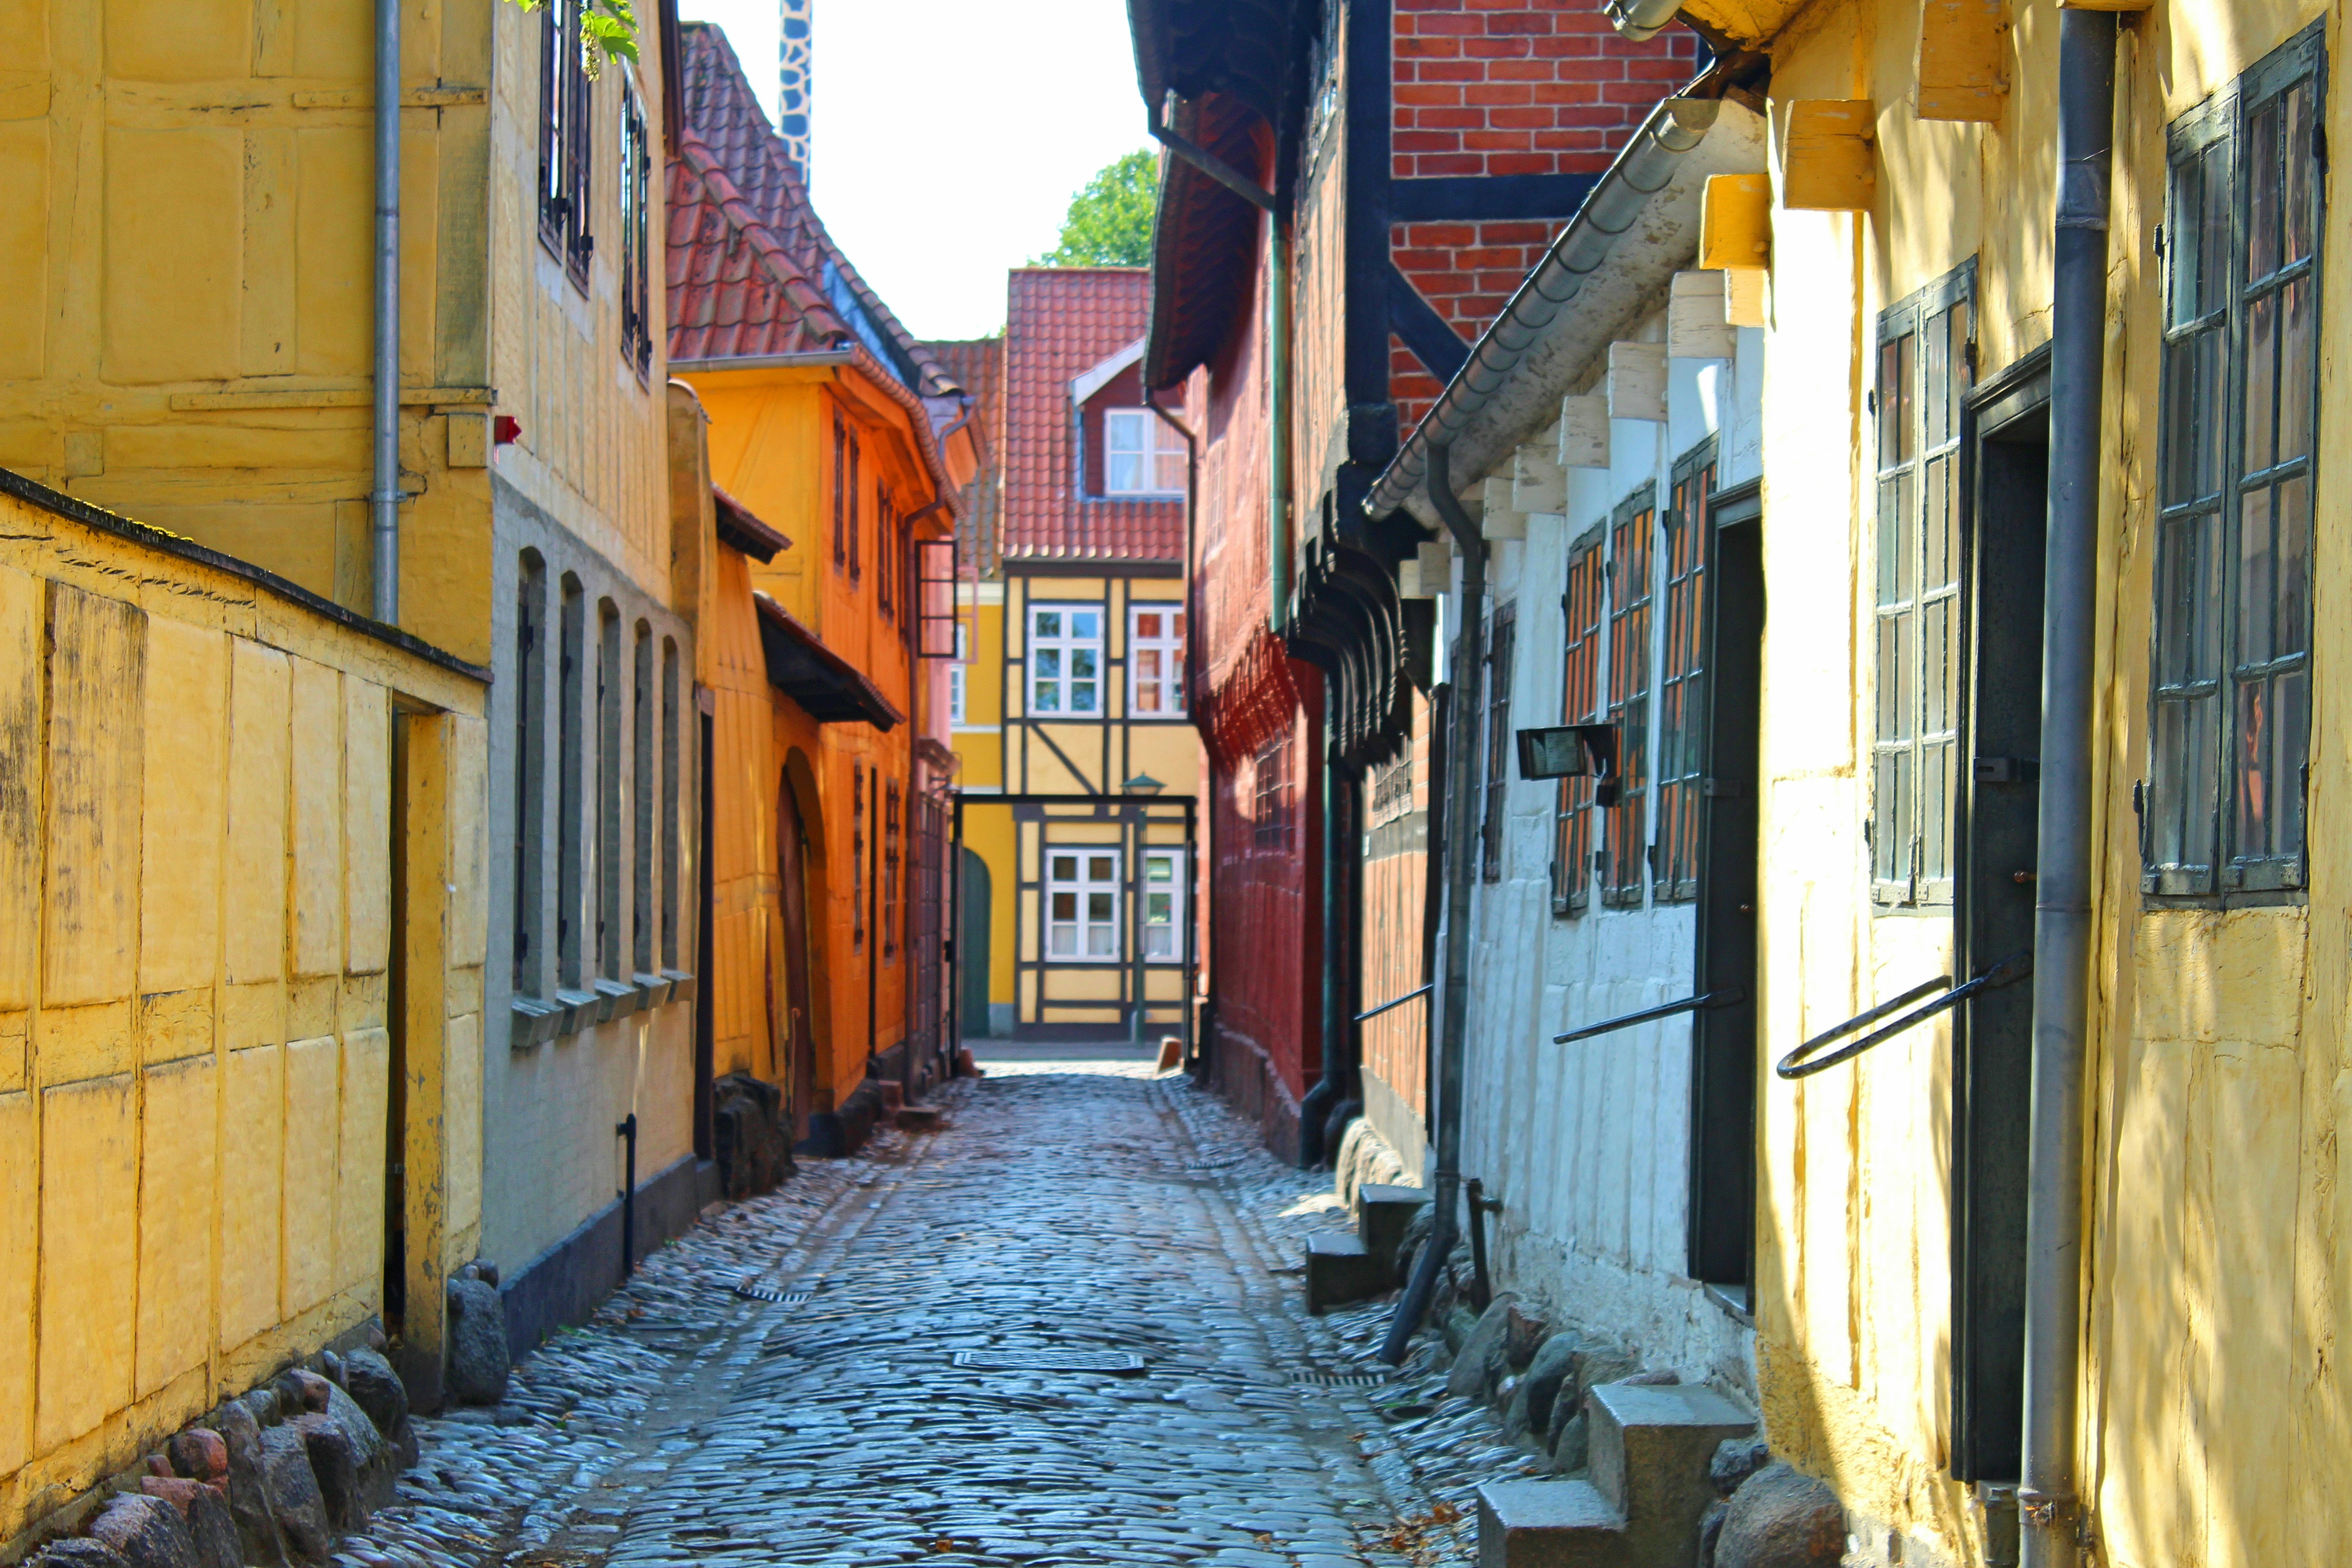 A narrow cobbled street in Møntergården, Odense, with brightly painted buildings.